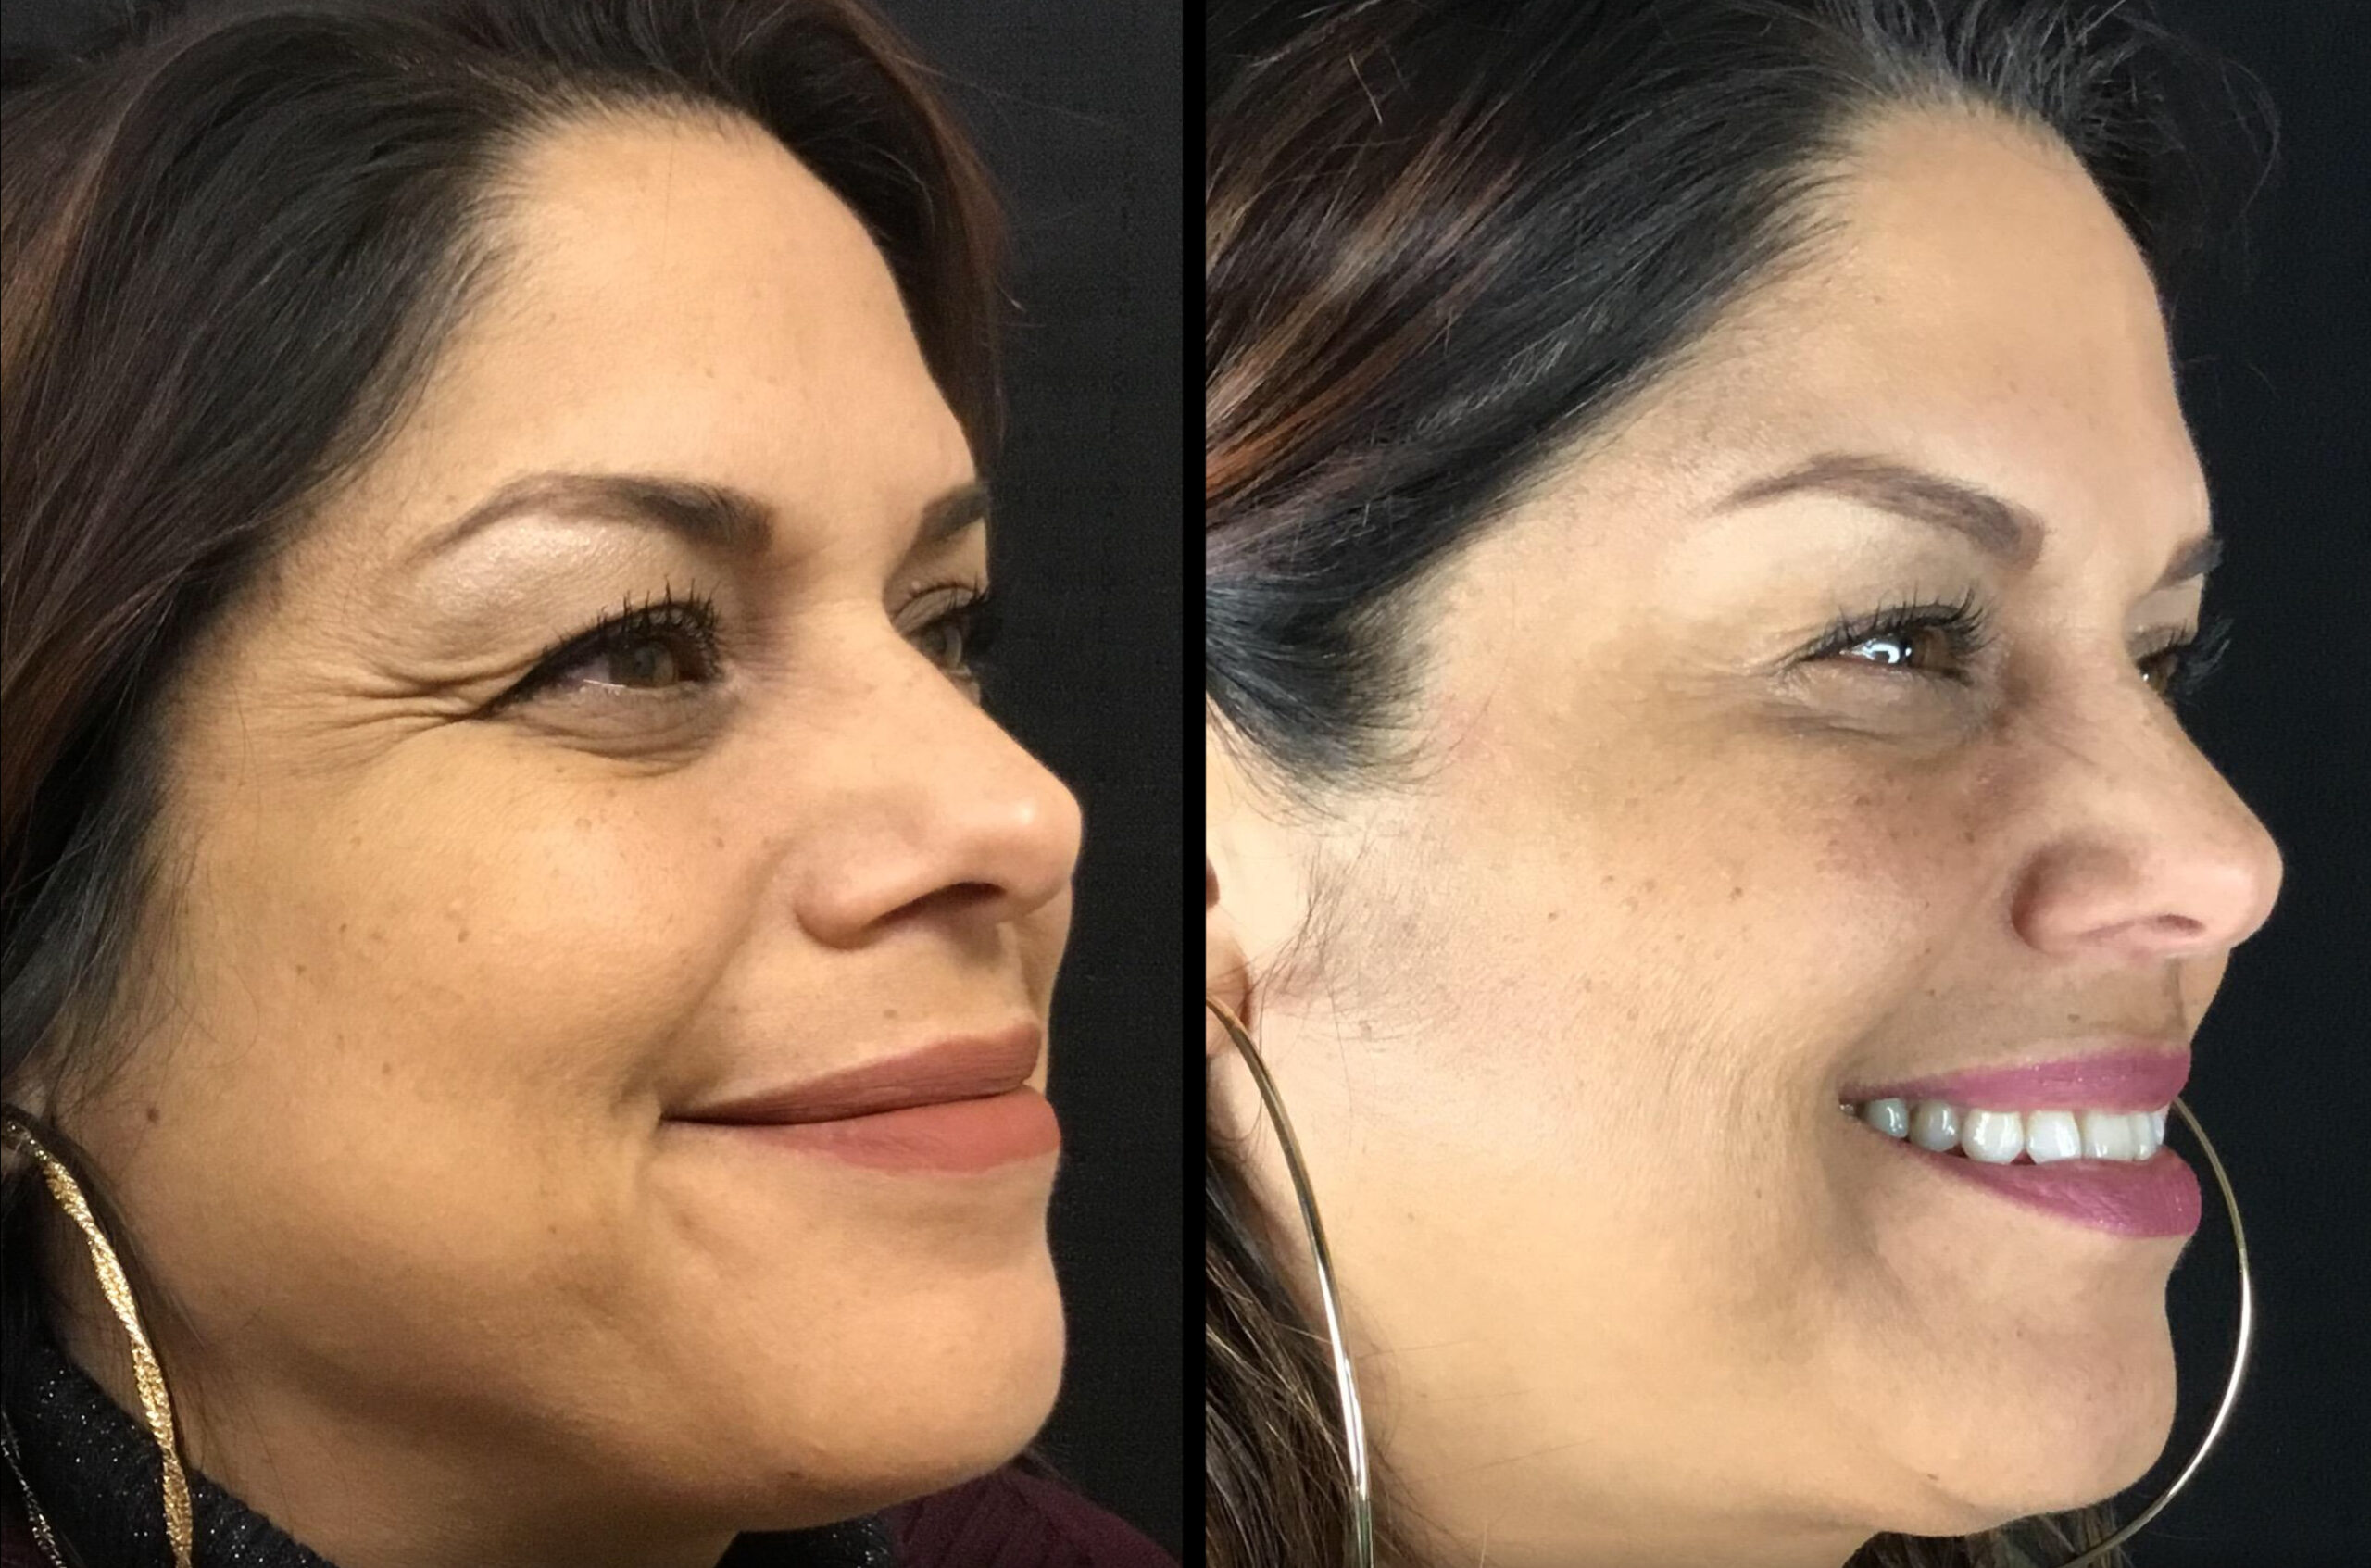 Before and After botox Photo